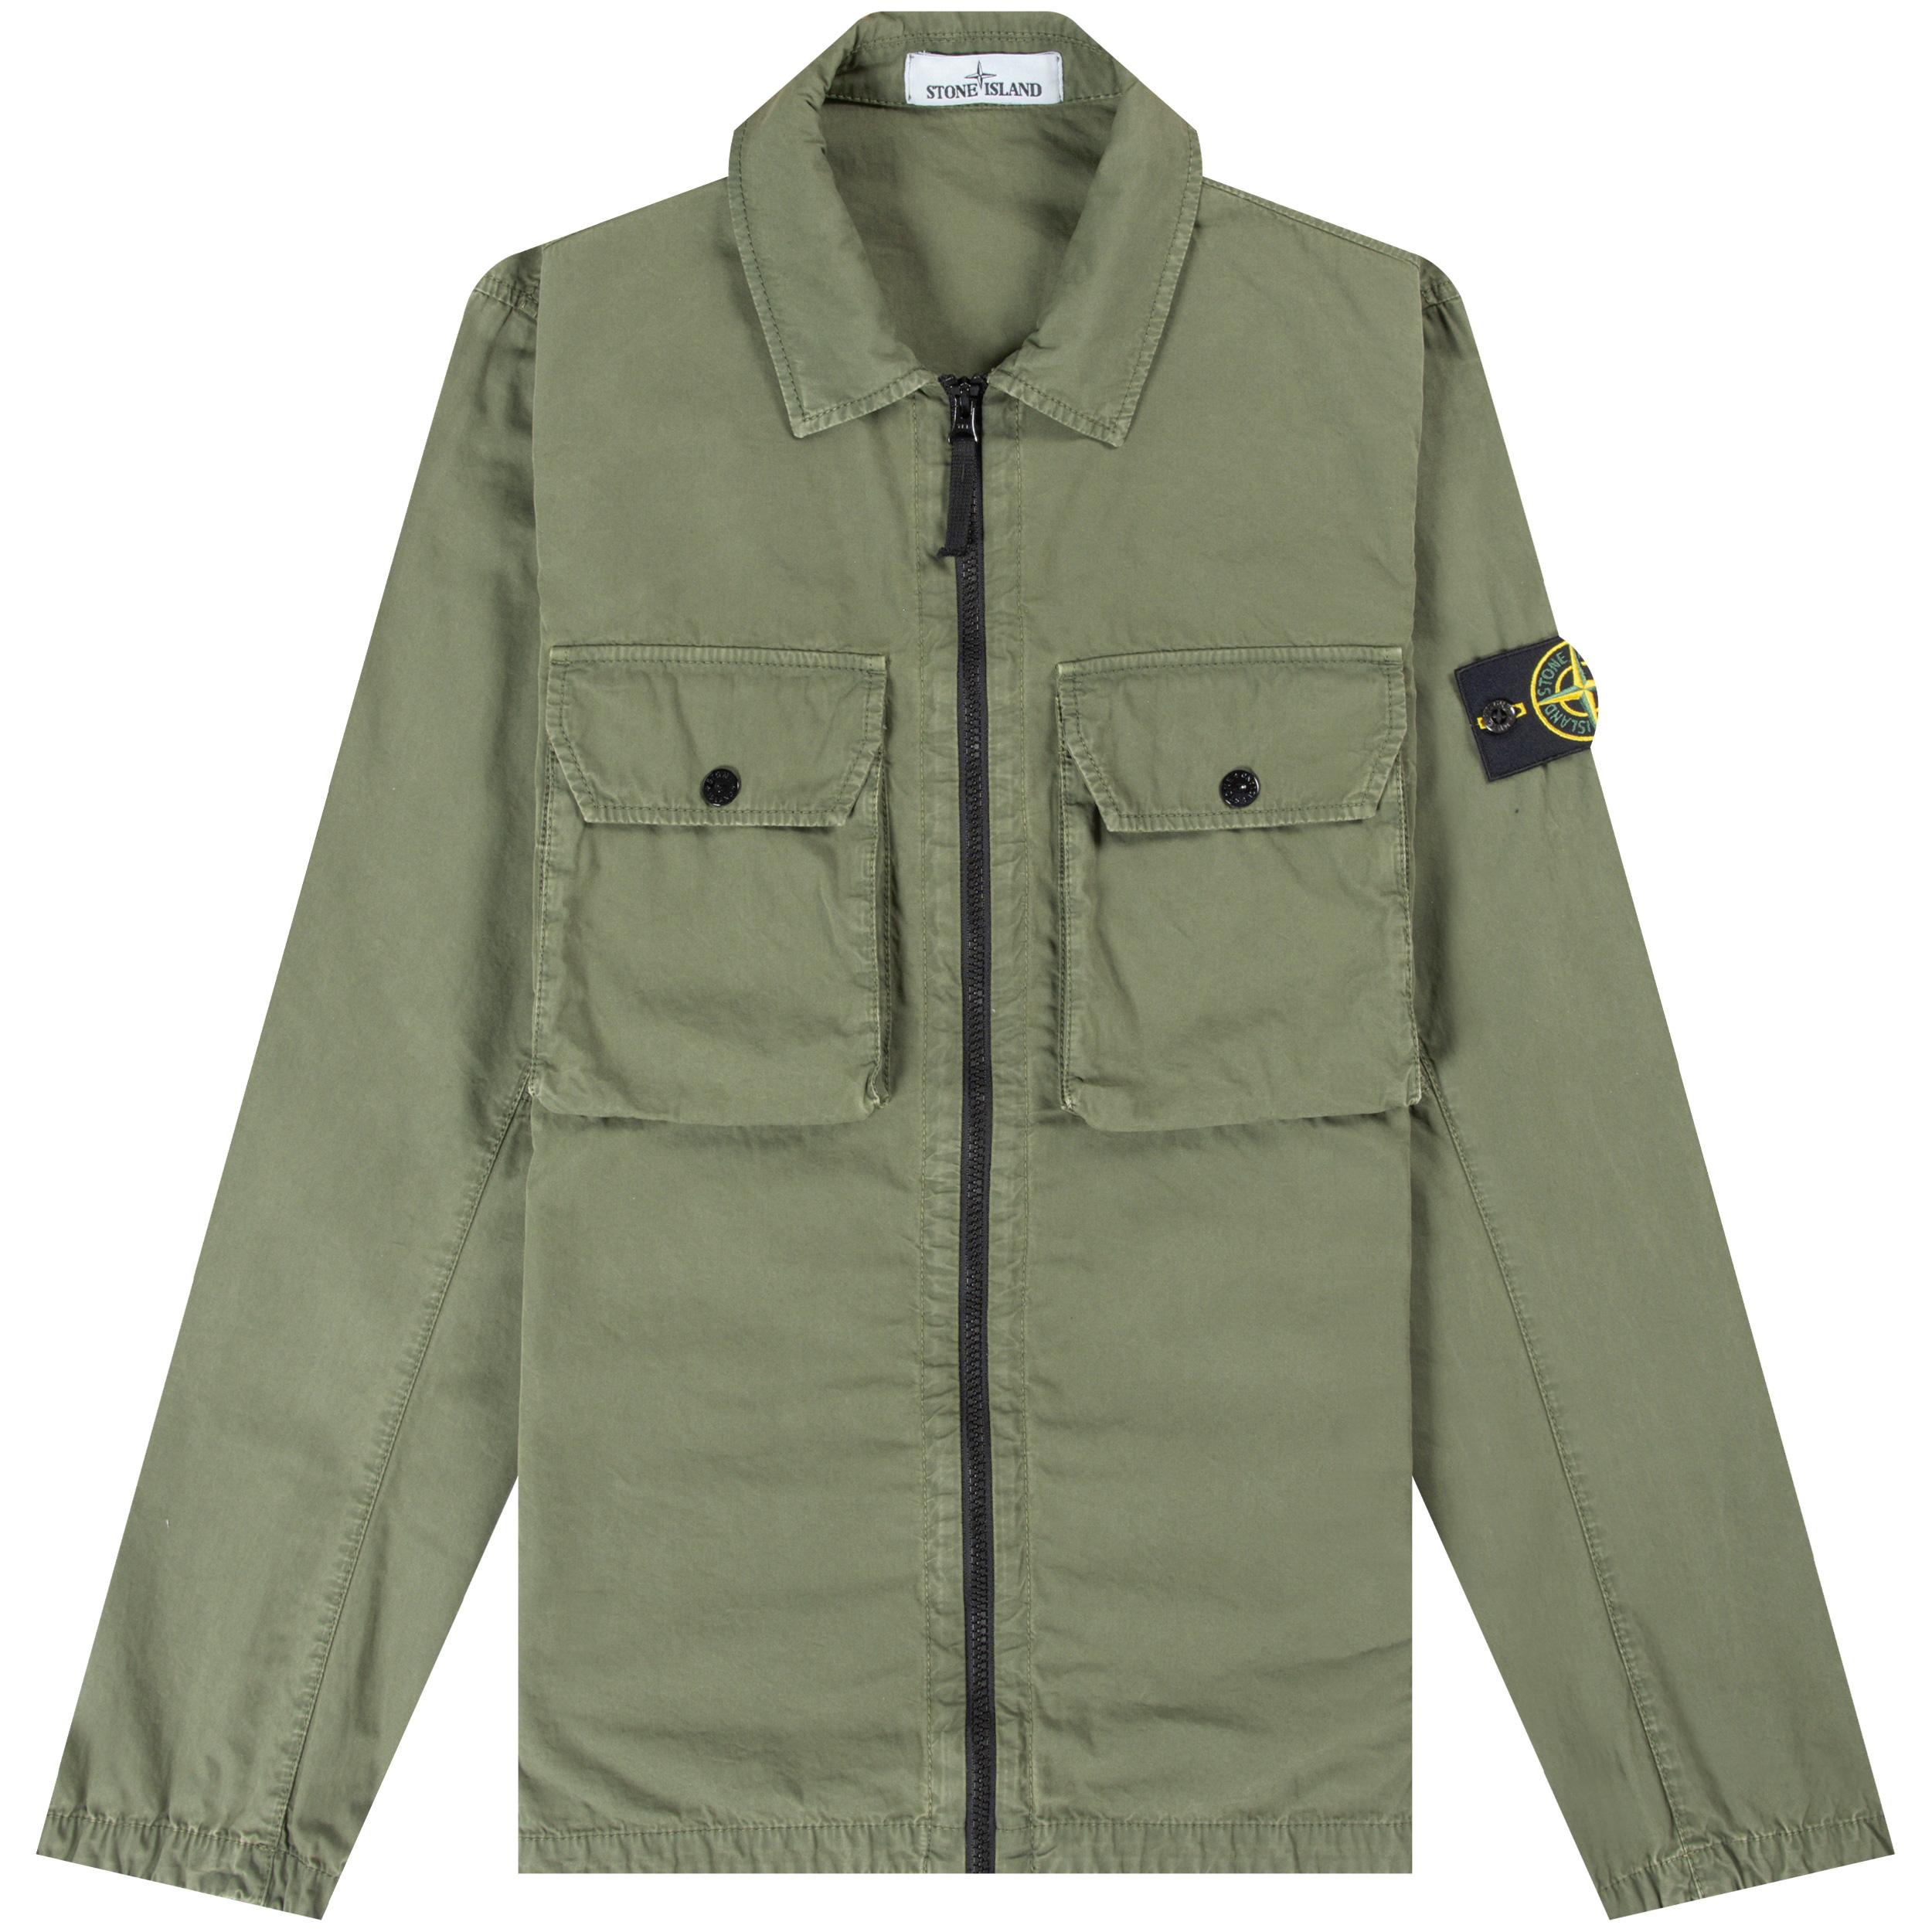 Stone Island Cotton 'garment Dyed' Overshirt Double Pocket Olive in Green  for Men - Lyst